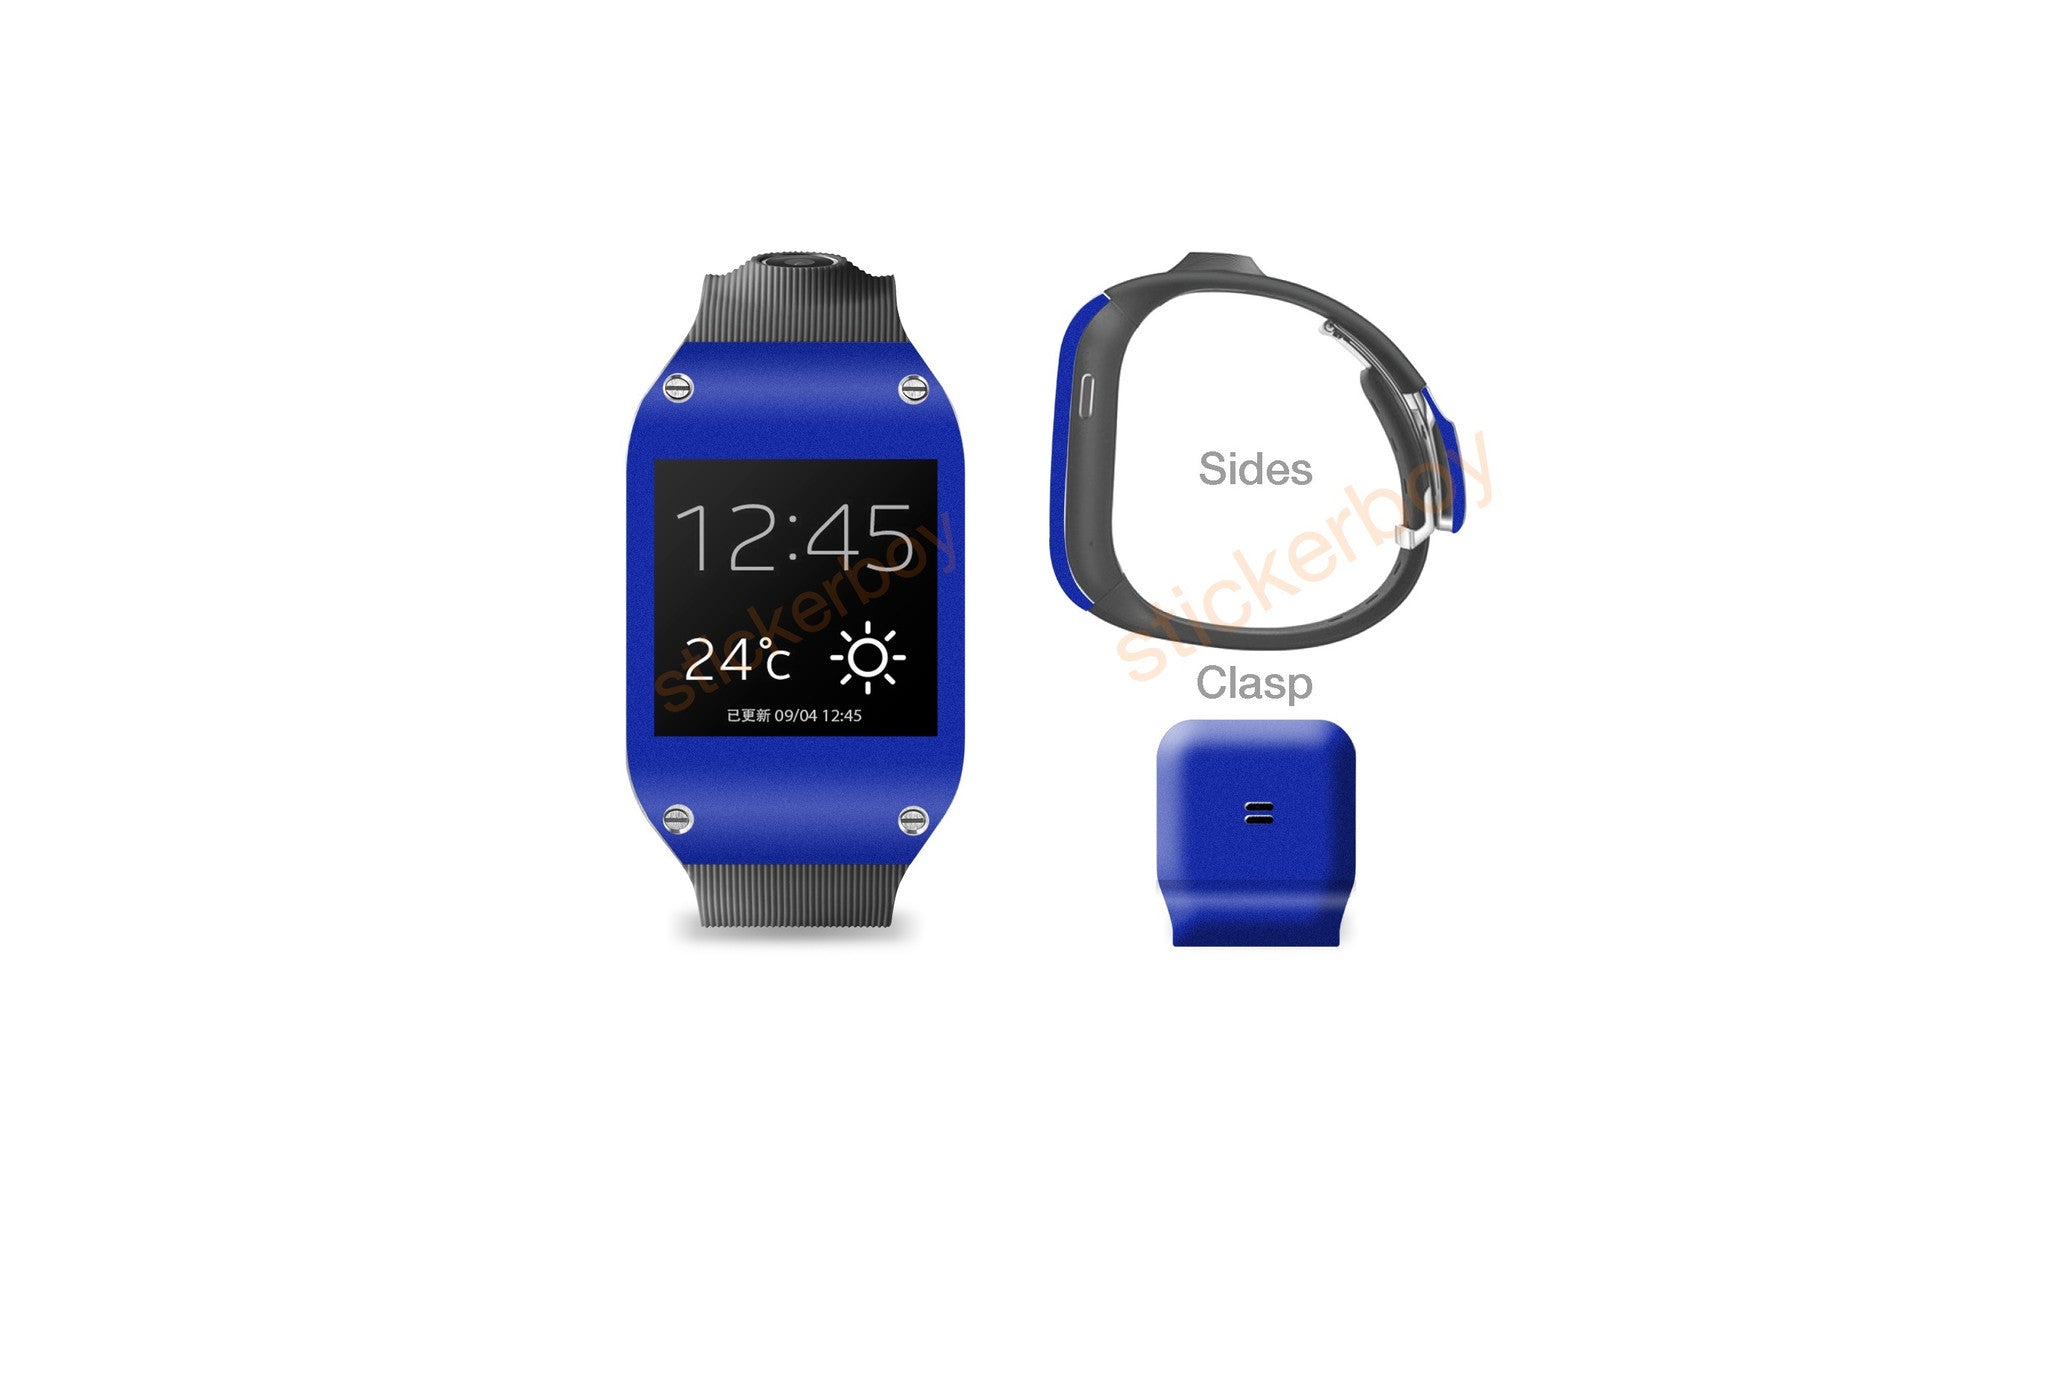 Blue Matte Antibacterial Samsung Galaxy Gear Skins Stickerboy Skins For Protecting Your Mobile Device